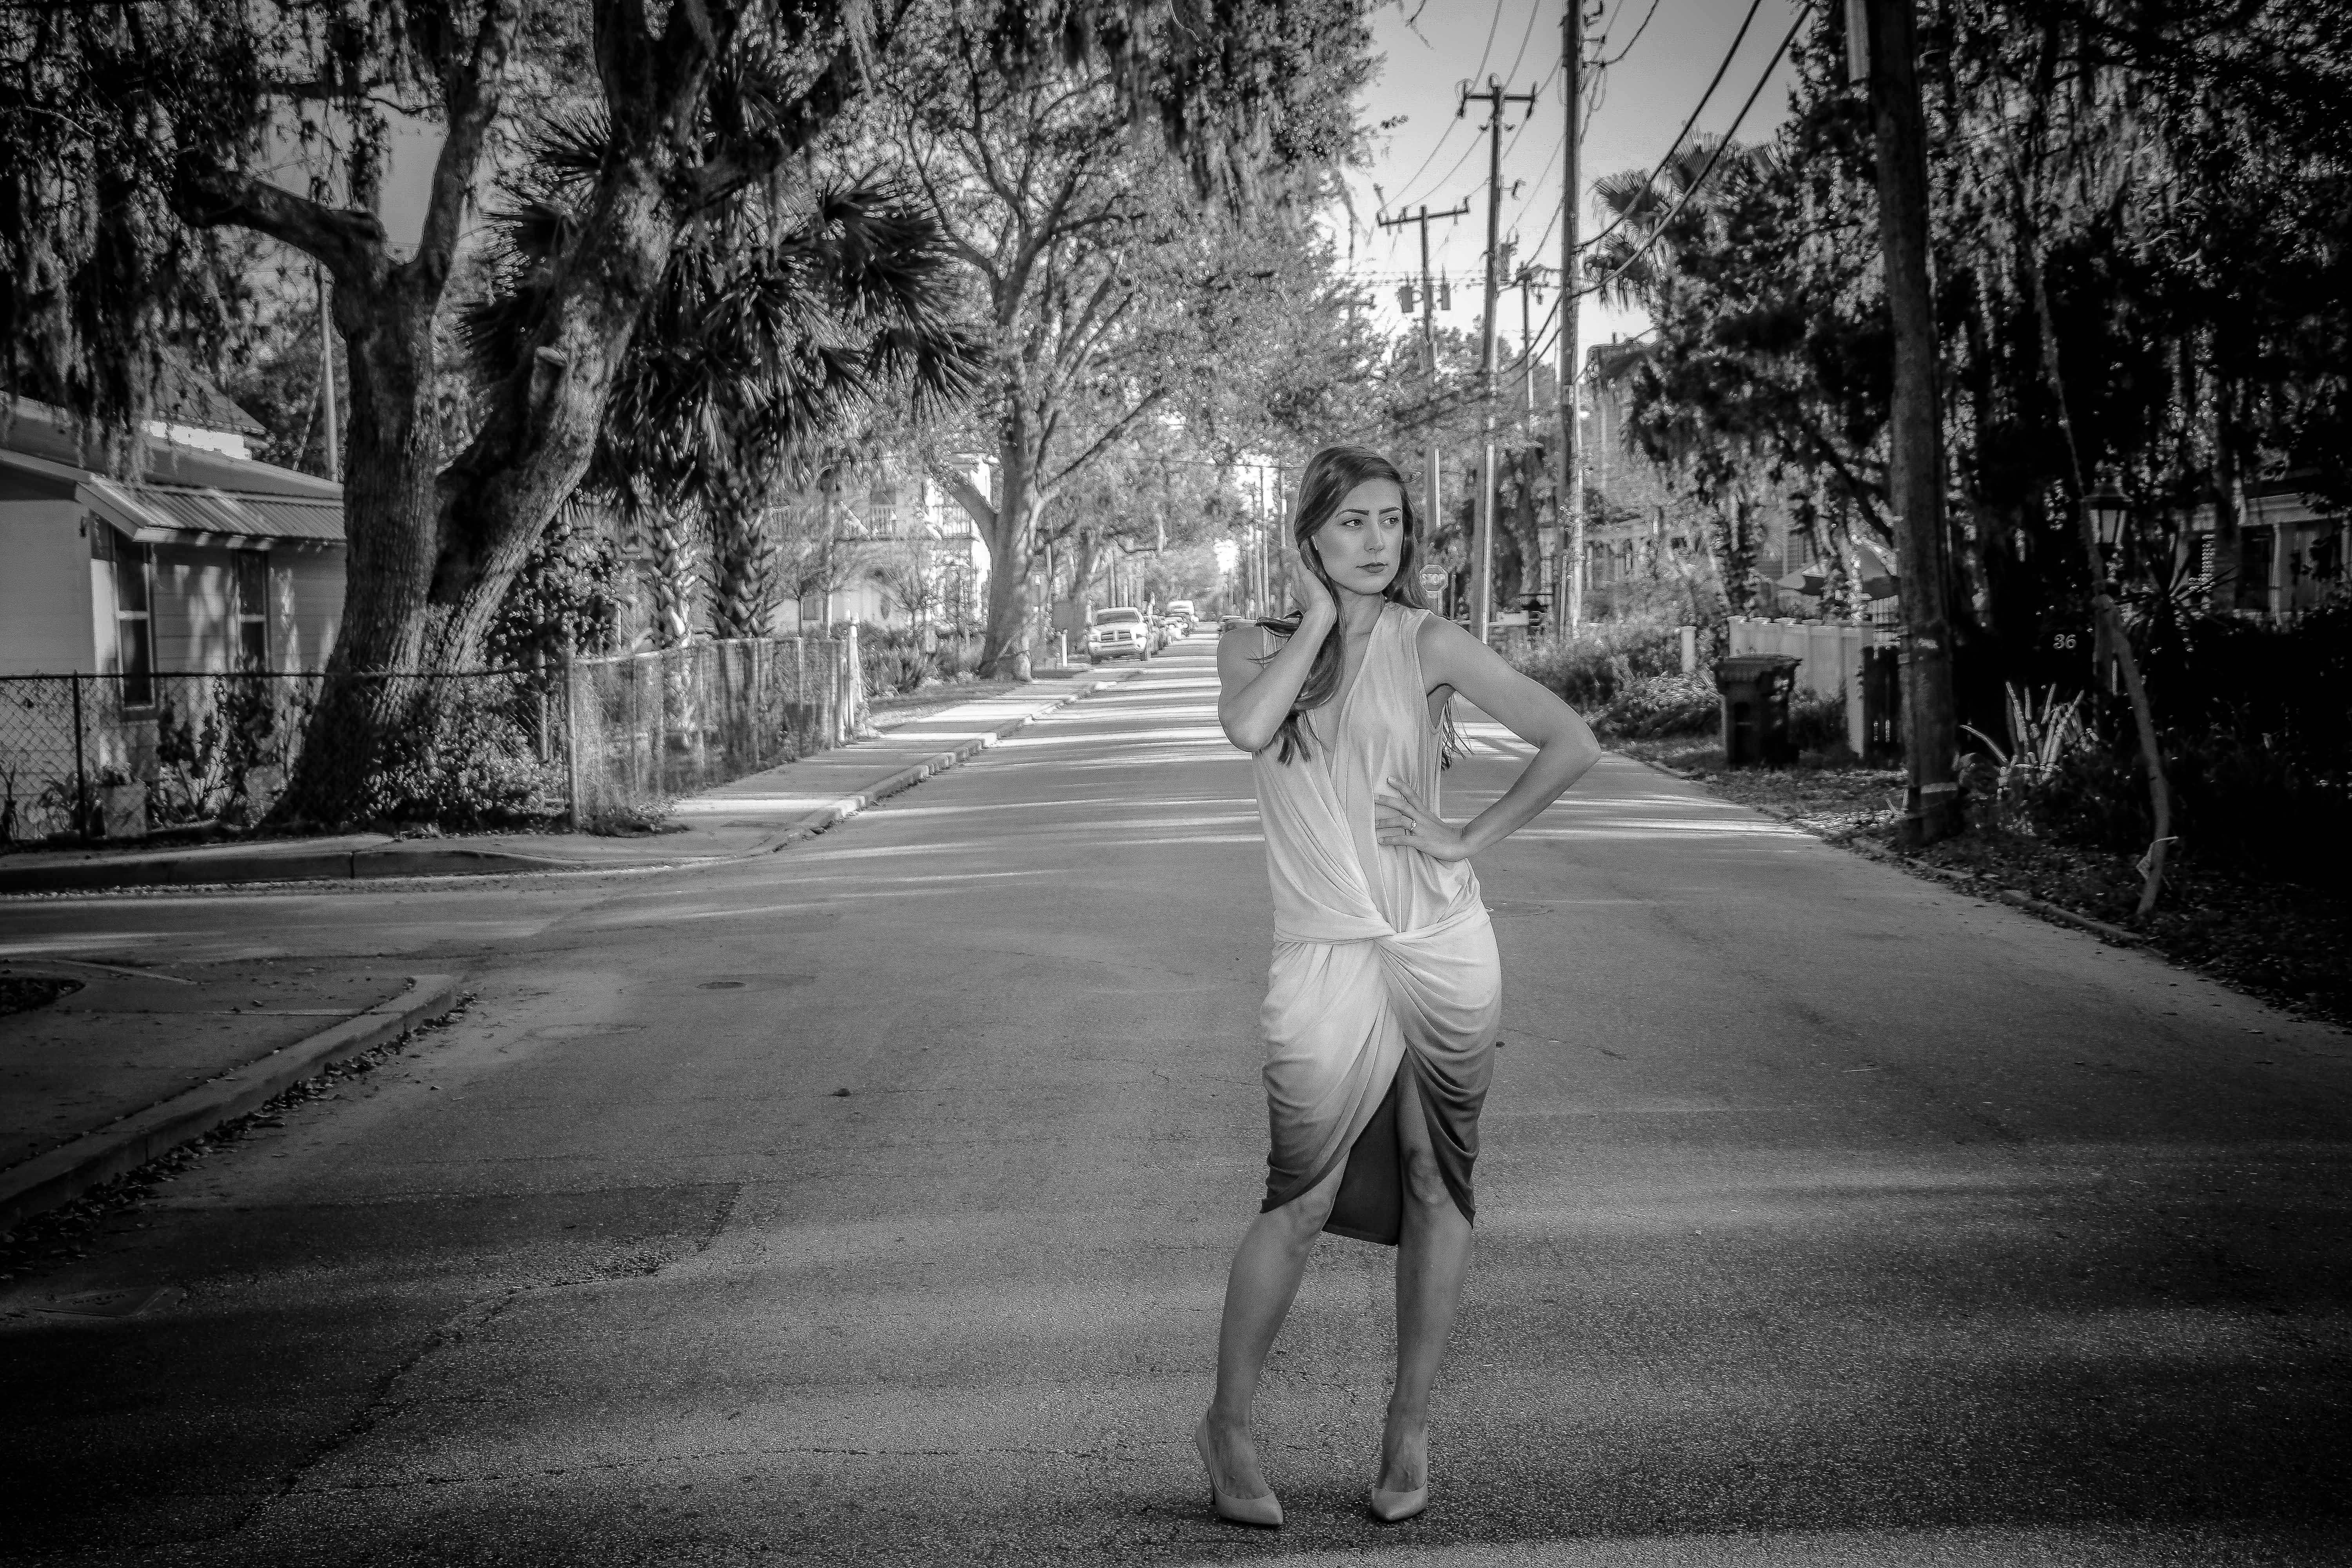 Woman Wearing Dress Standing on Center of Road, Pose, Young, Woman, Urban, HQ Photo